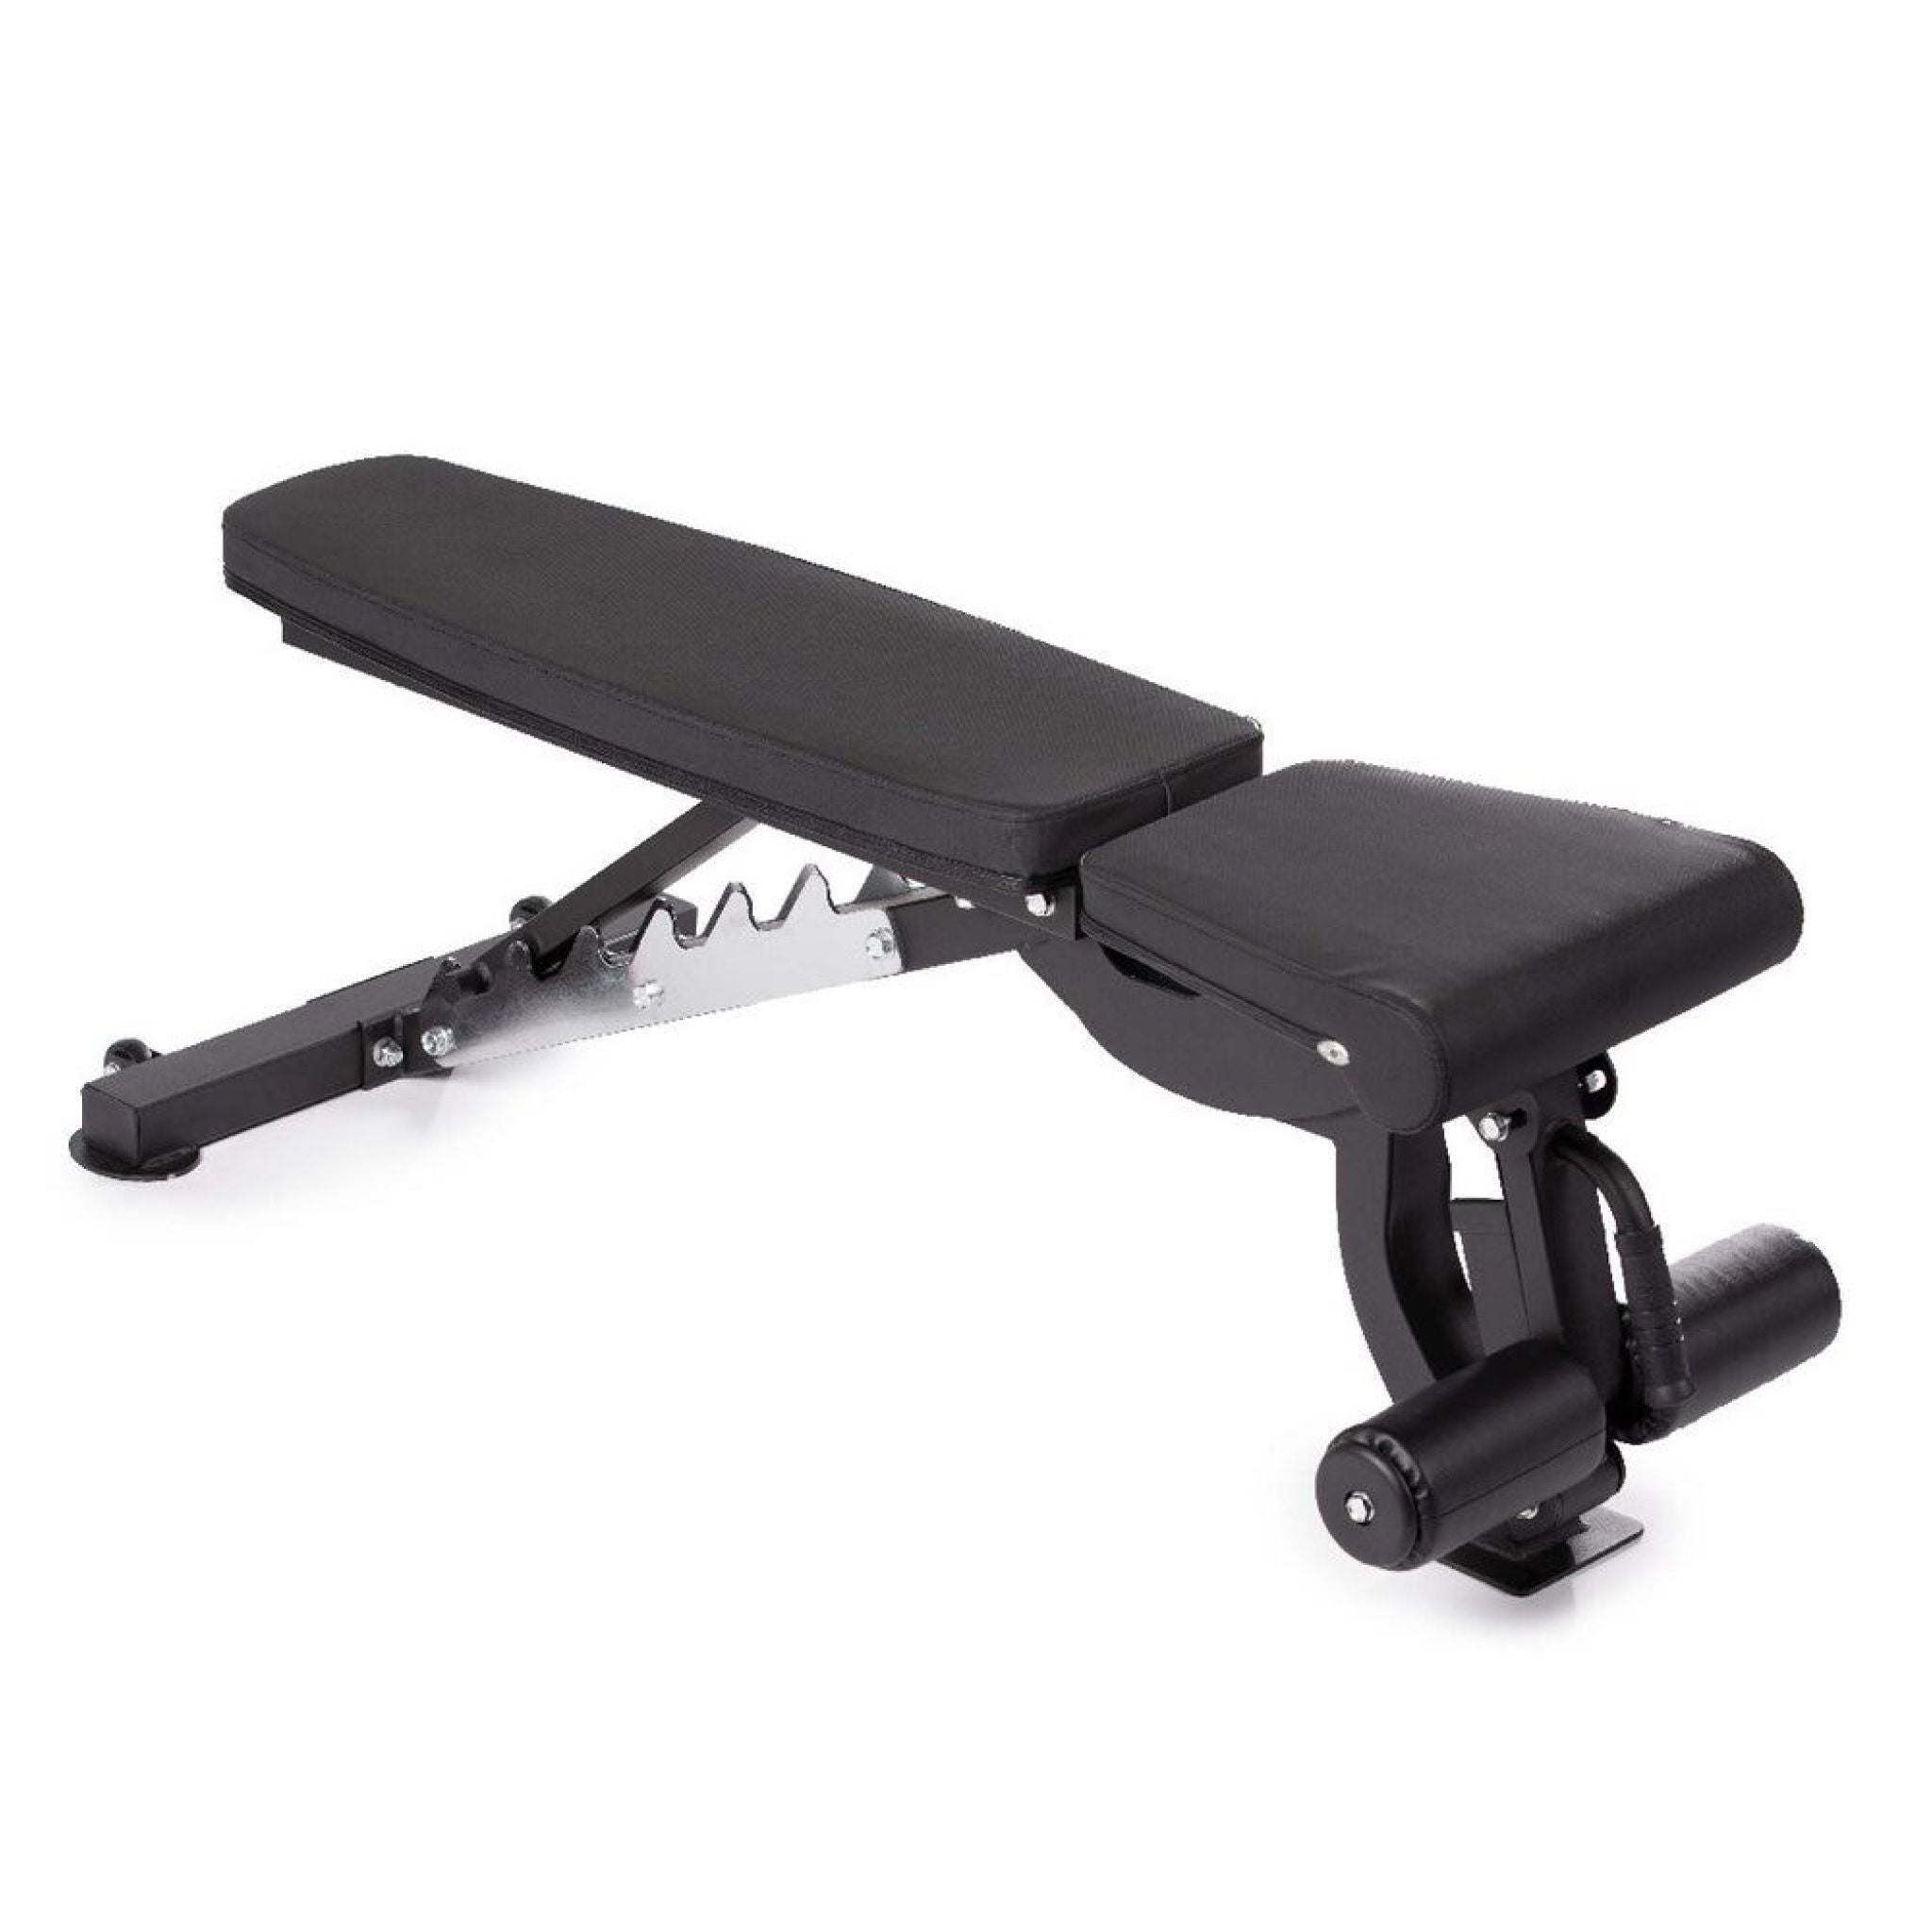 Express Gym Supply's brand-new Economy Adjustable Exercise Bench